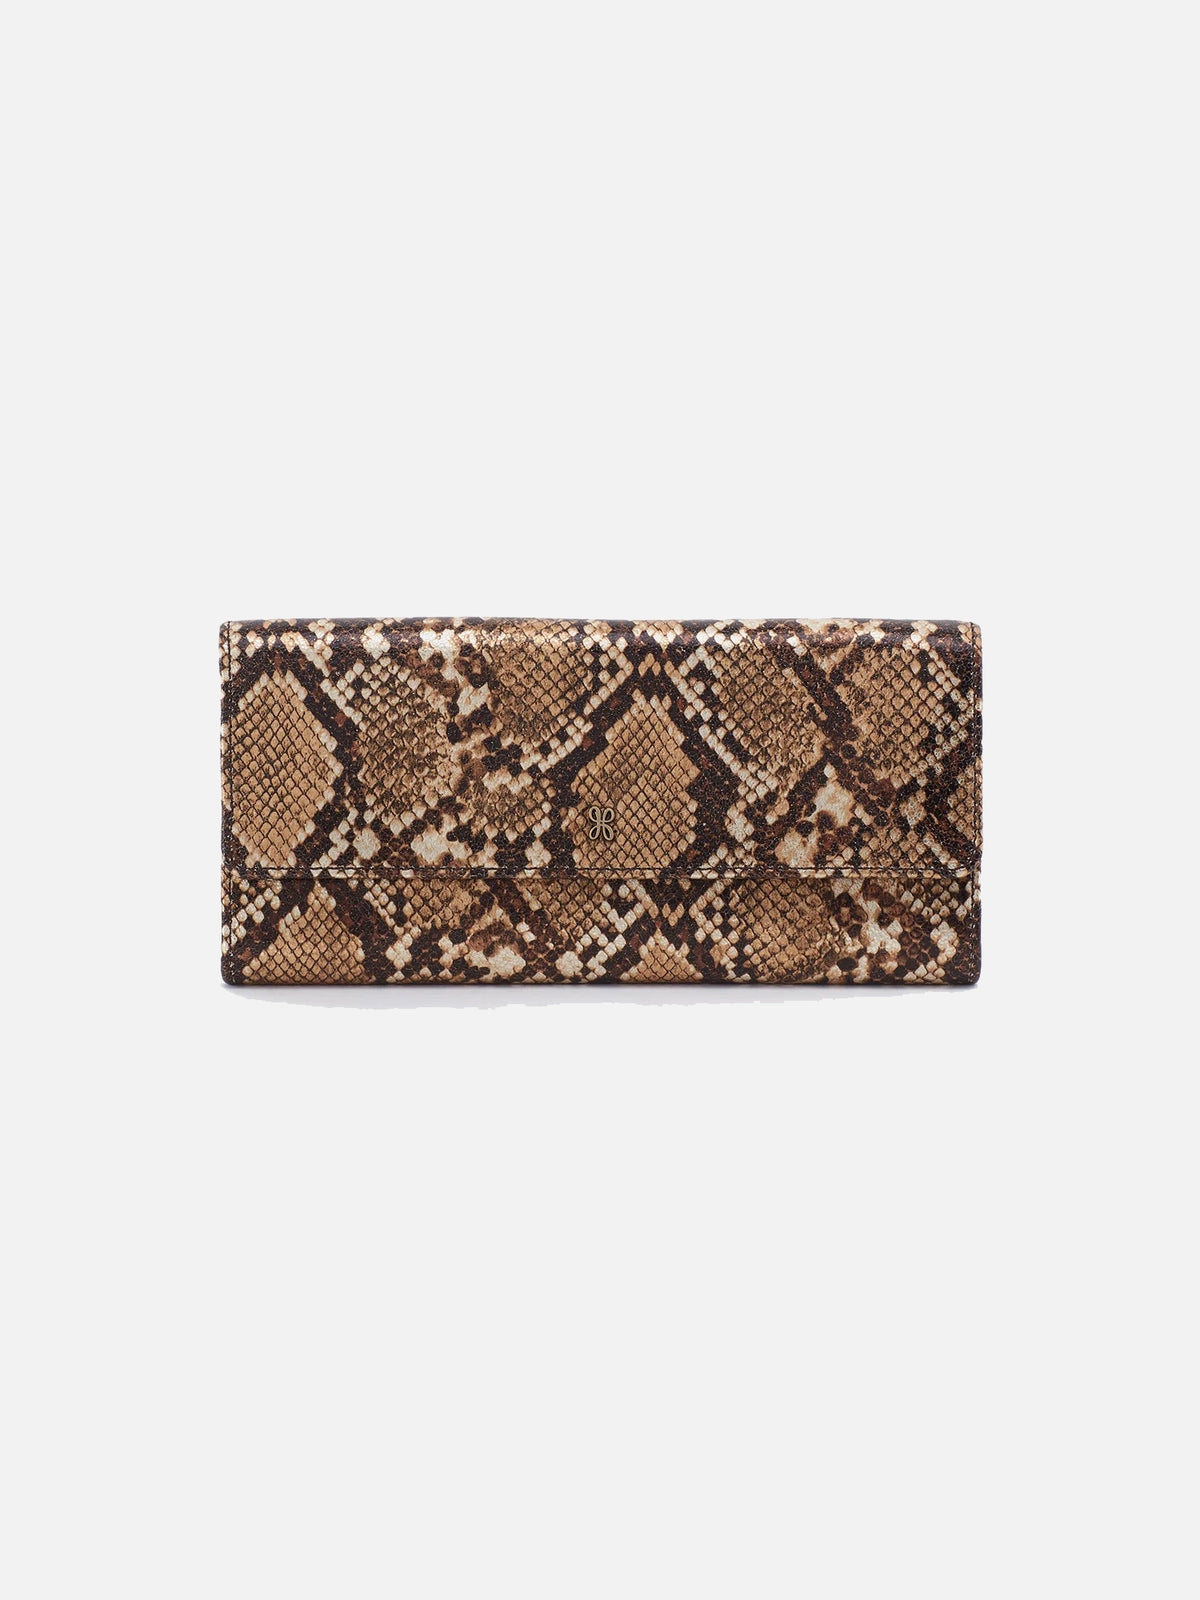 hobo jill large trifold continental wallet in golden snake printed leather